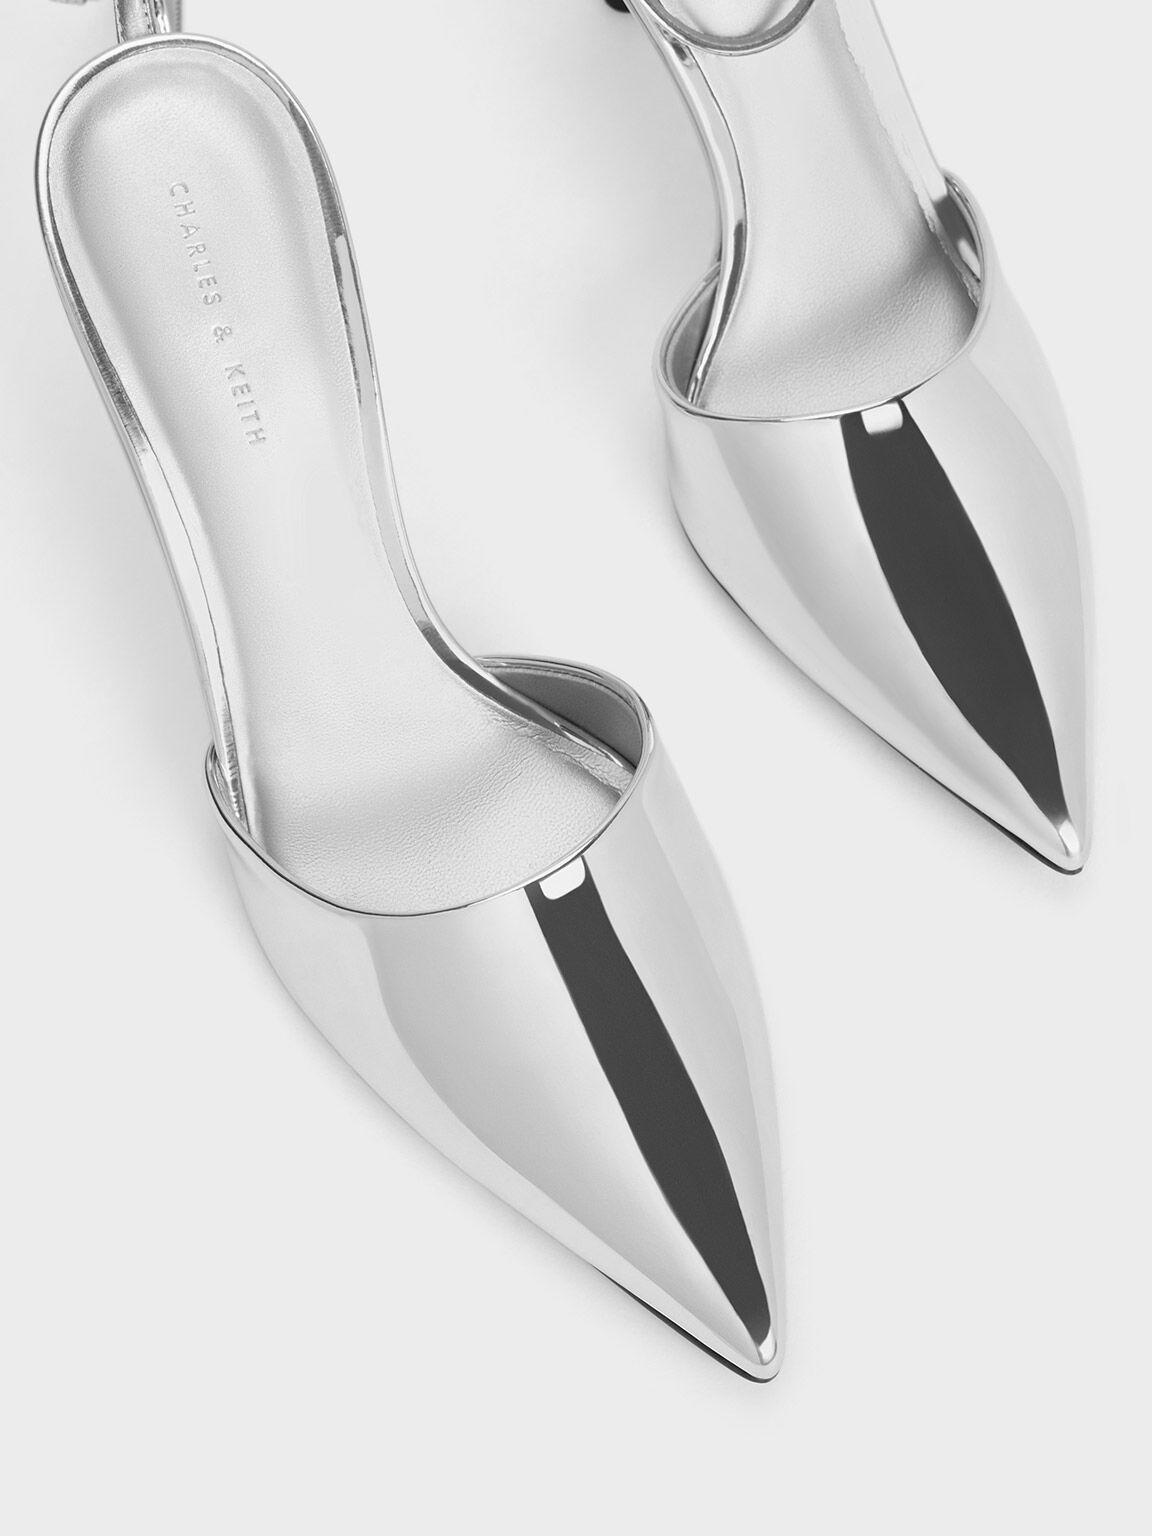 Charles & Keith sling back statement heeled shoes in silver | ASOS